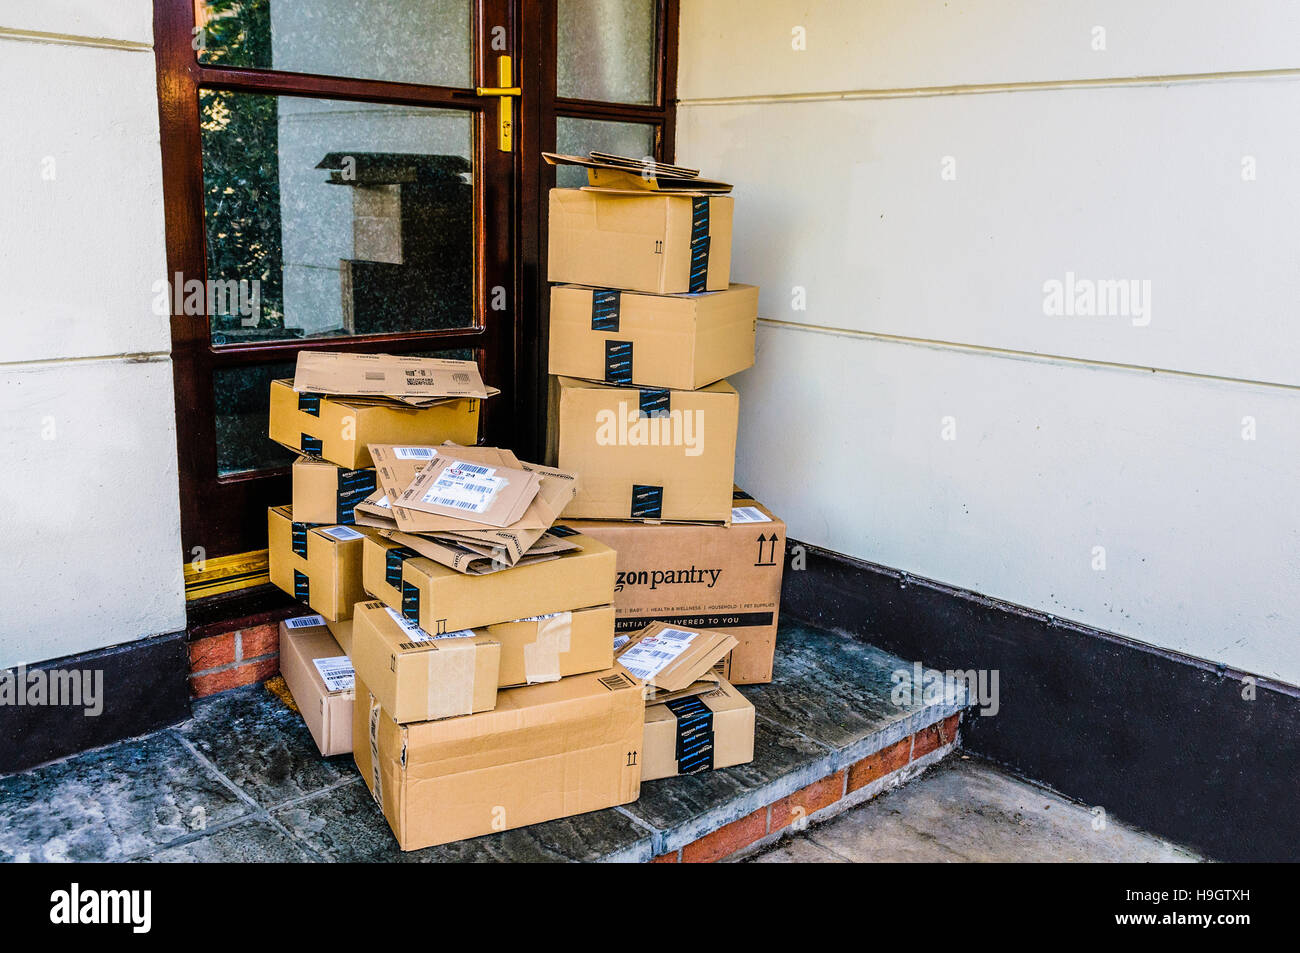 Large quantity of Amazon, Amazon Prime, and Amazon Pantry boxes on the front step of a house after being delivered. Stock Photo